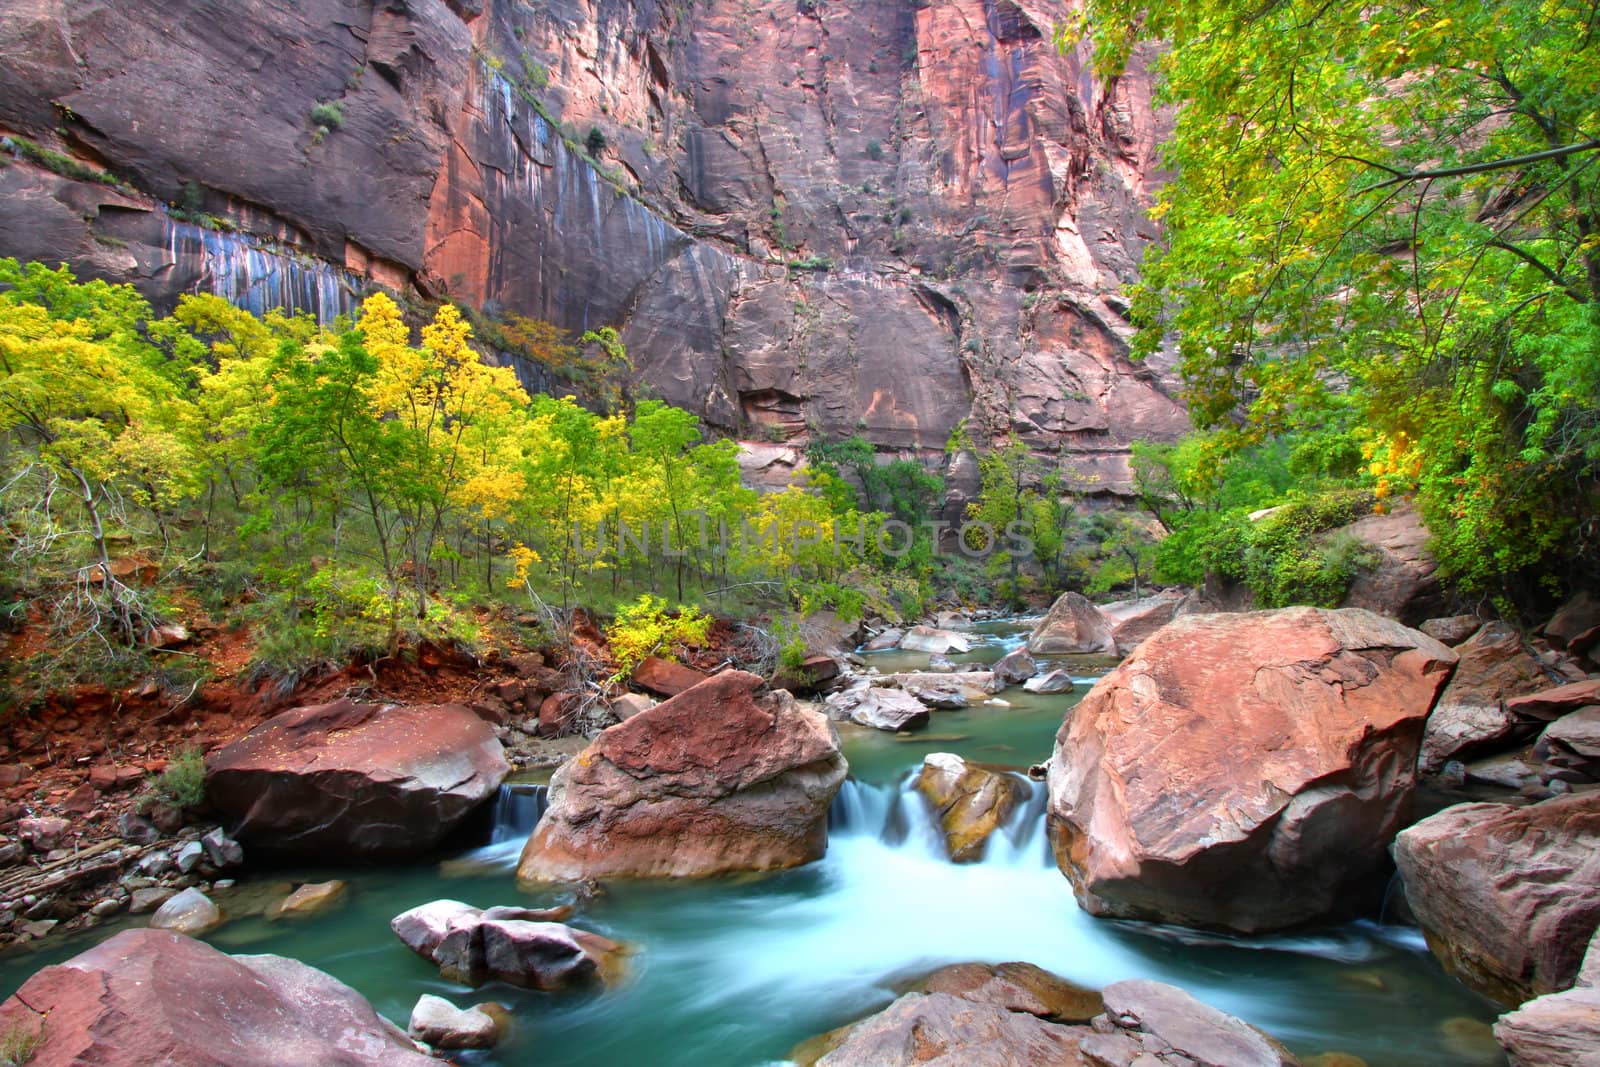 Virign River Zion National Park by Wirepec